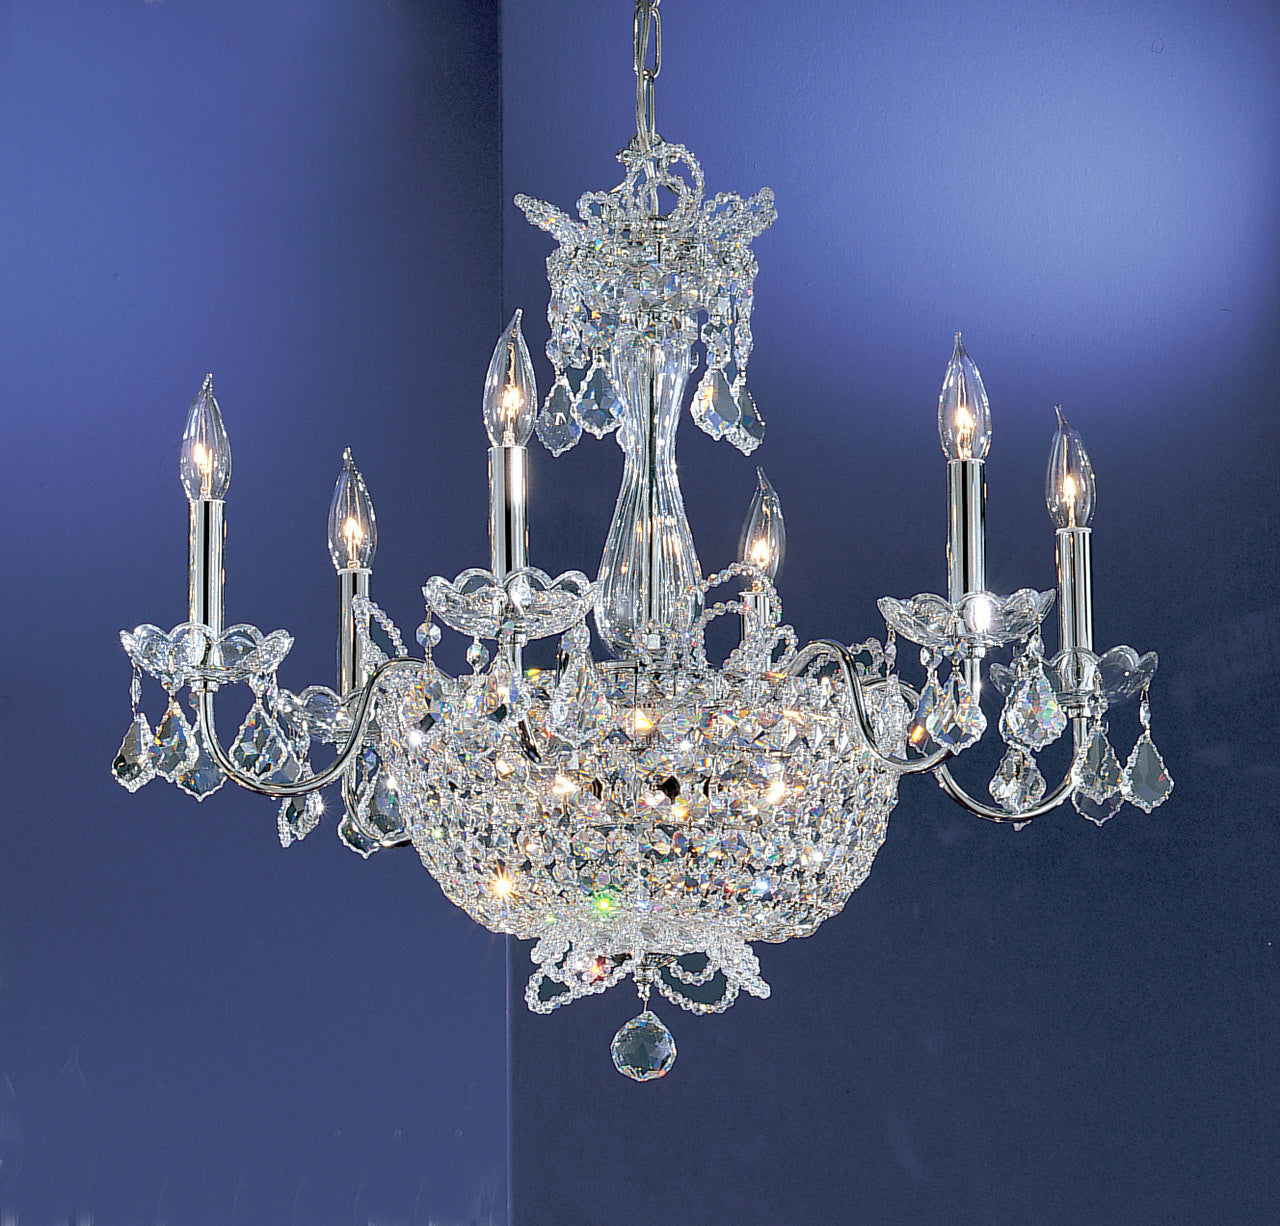 Classic Lighting 69786 CH SC Crown Jewels Crystal Chandelier in Chrome